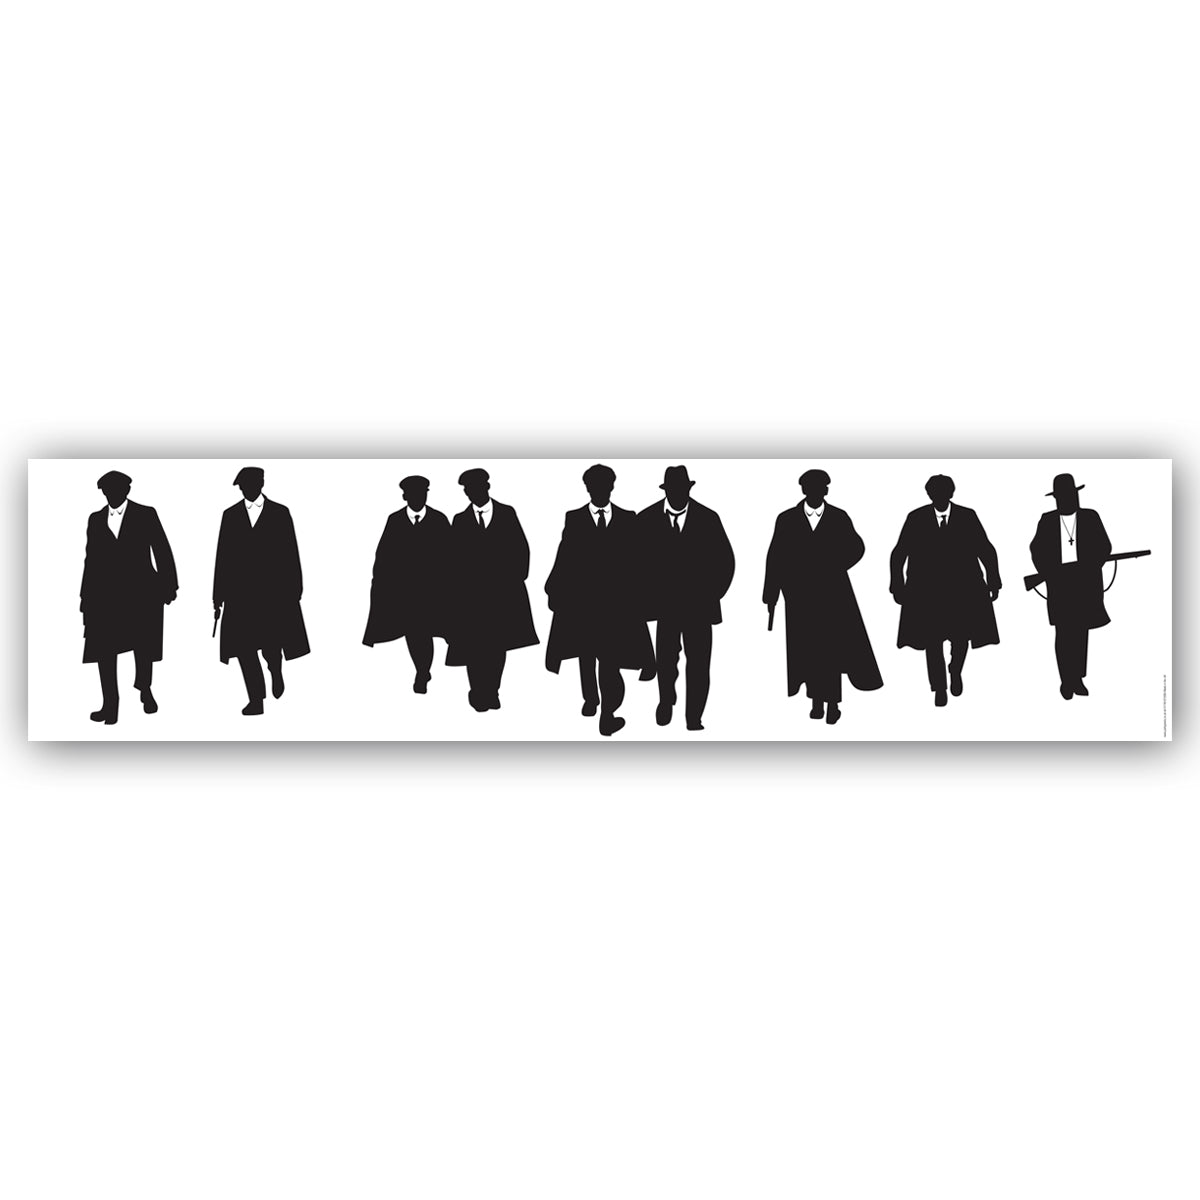 Peaky Blinders  Gangsters Silhouettes Banner Decoration